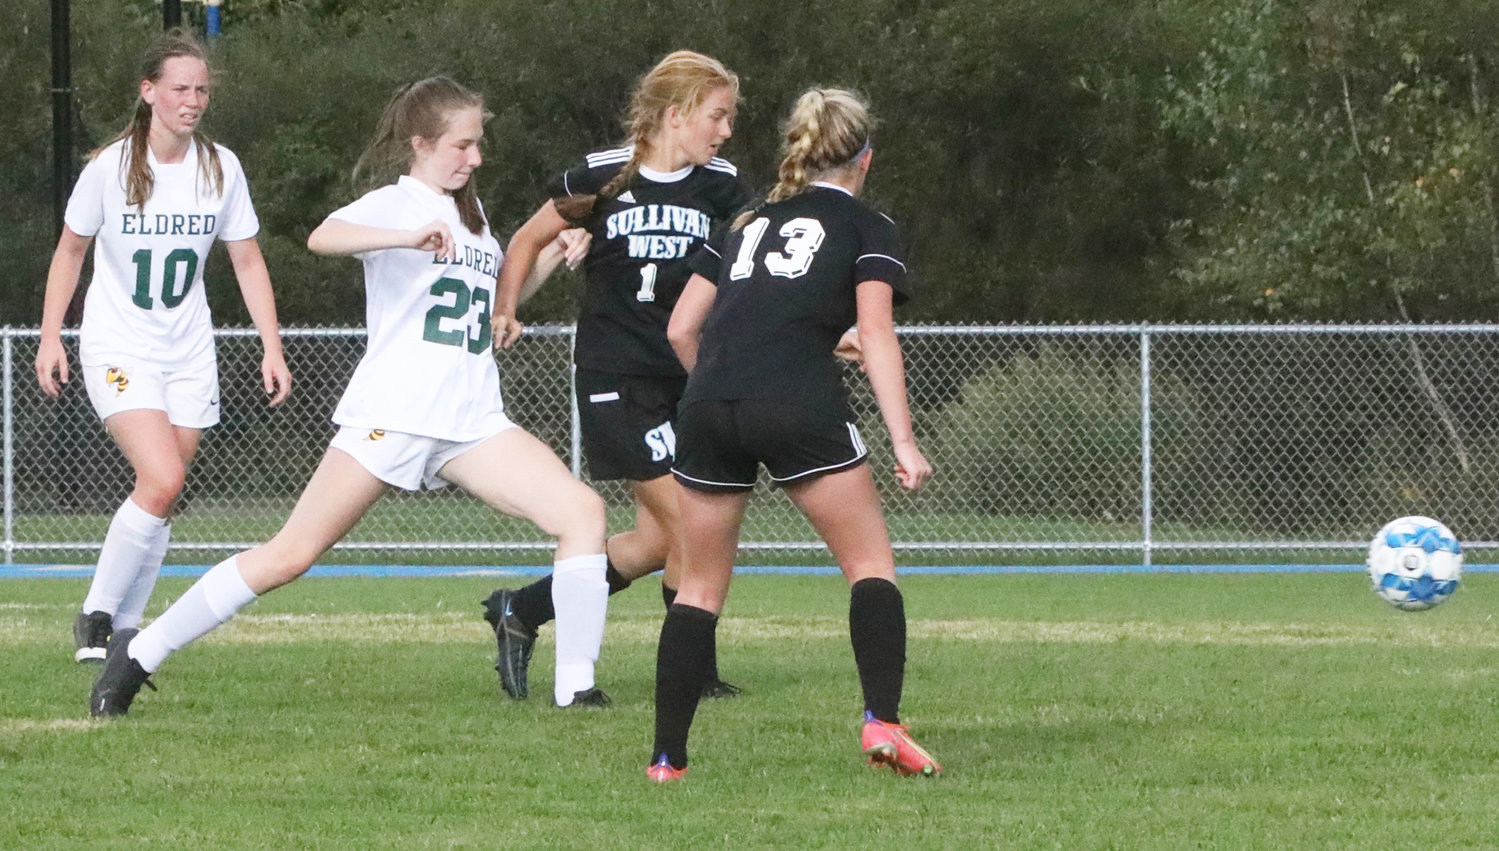 Eldred’s Tabitha Smith kicks the ball up the field between Sullivan West’s Nicole Reeves (1) and Sophie Flynn (13).